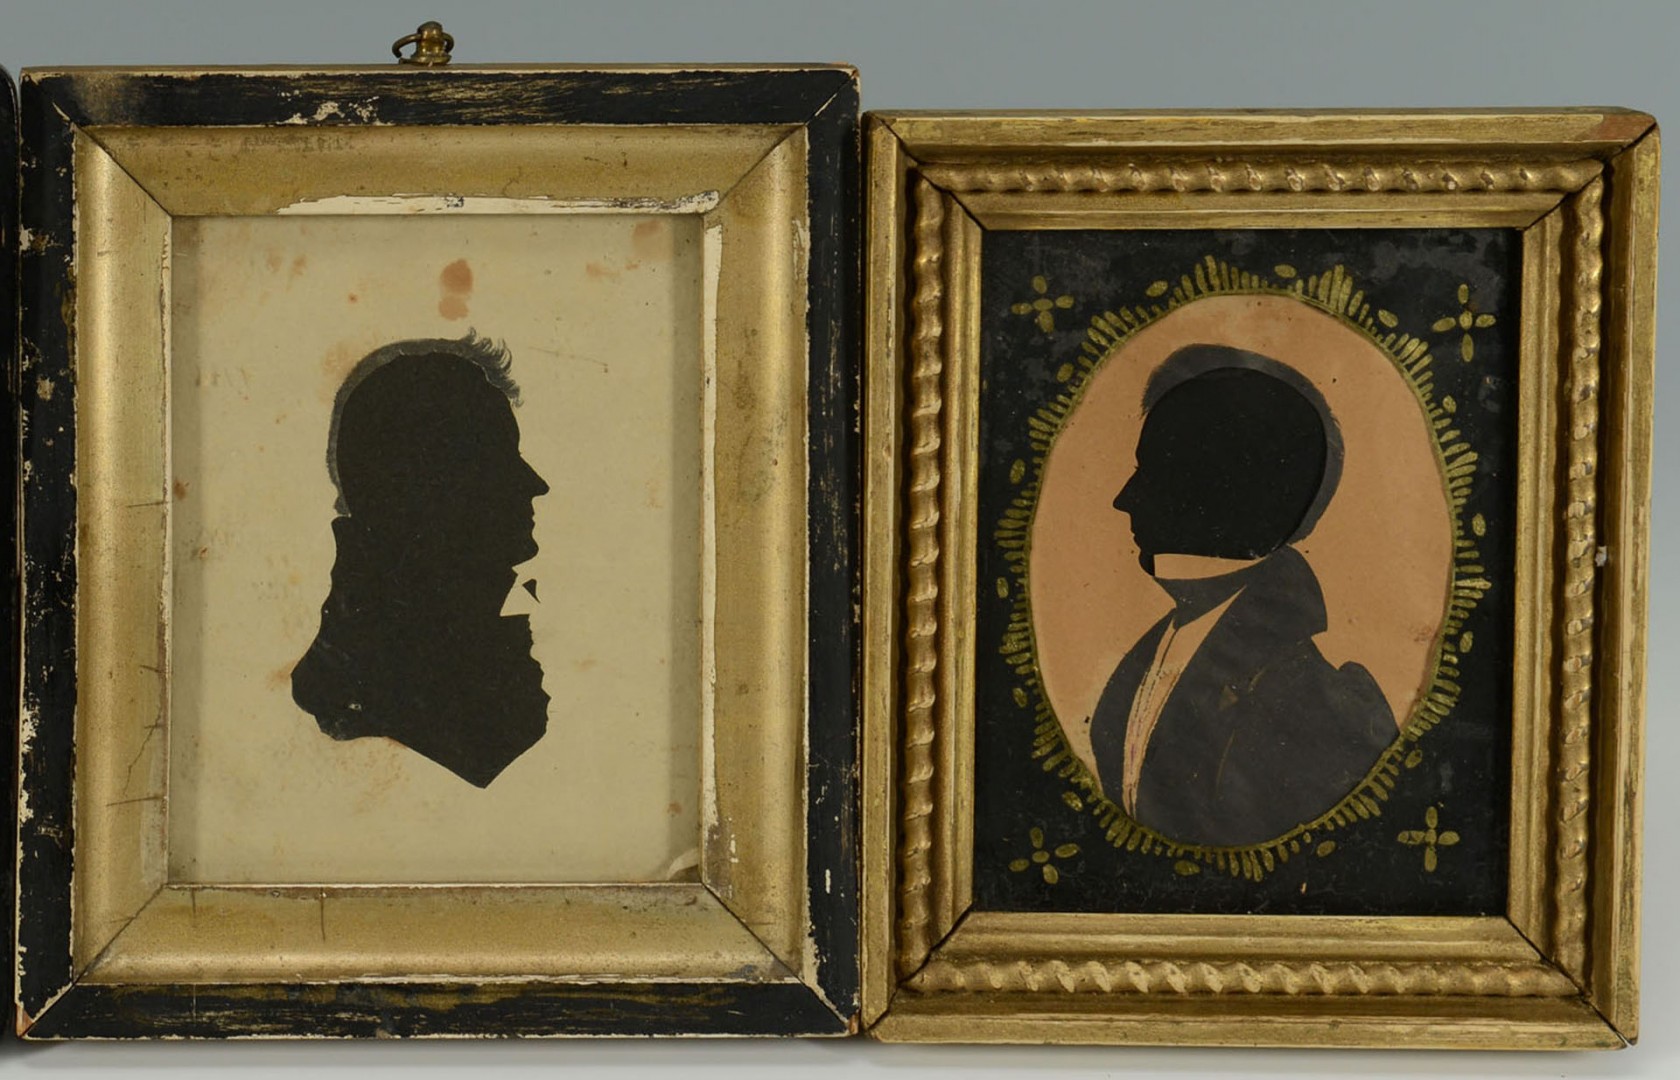 Lot 223: Four 19th c. Silhouettes, 3 Gents and 1 Woman